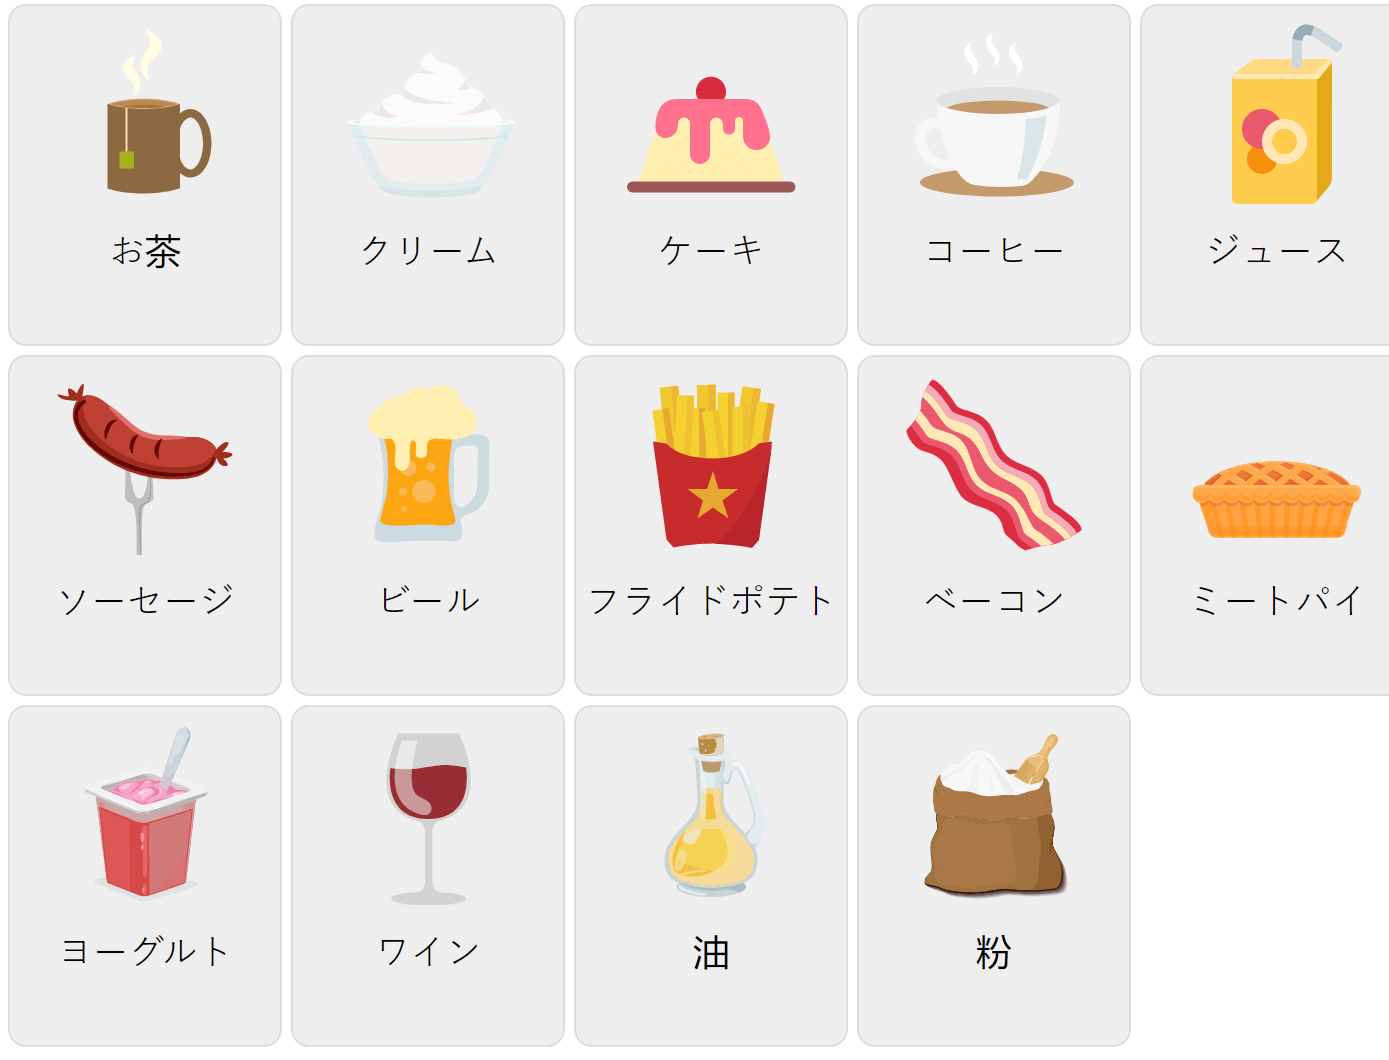 Food in Japanese 2